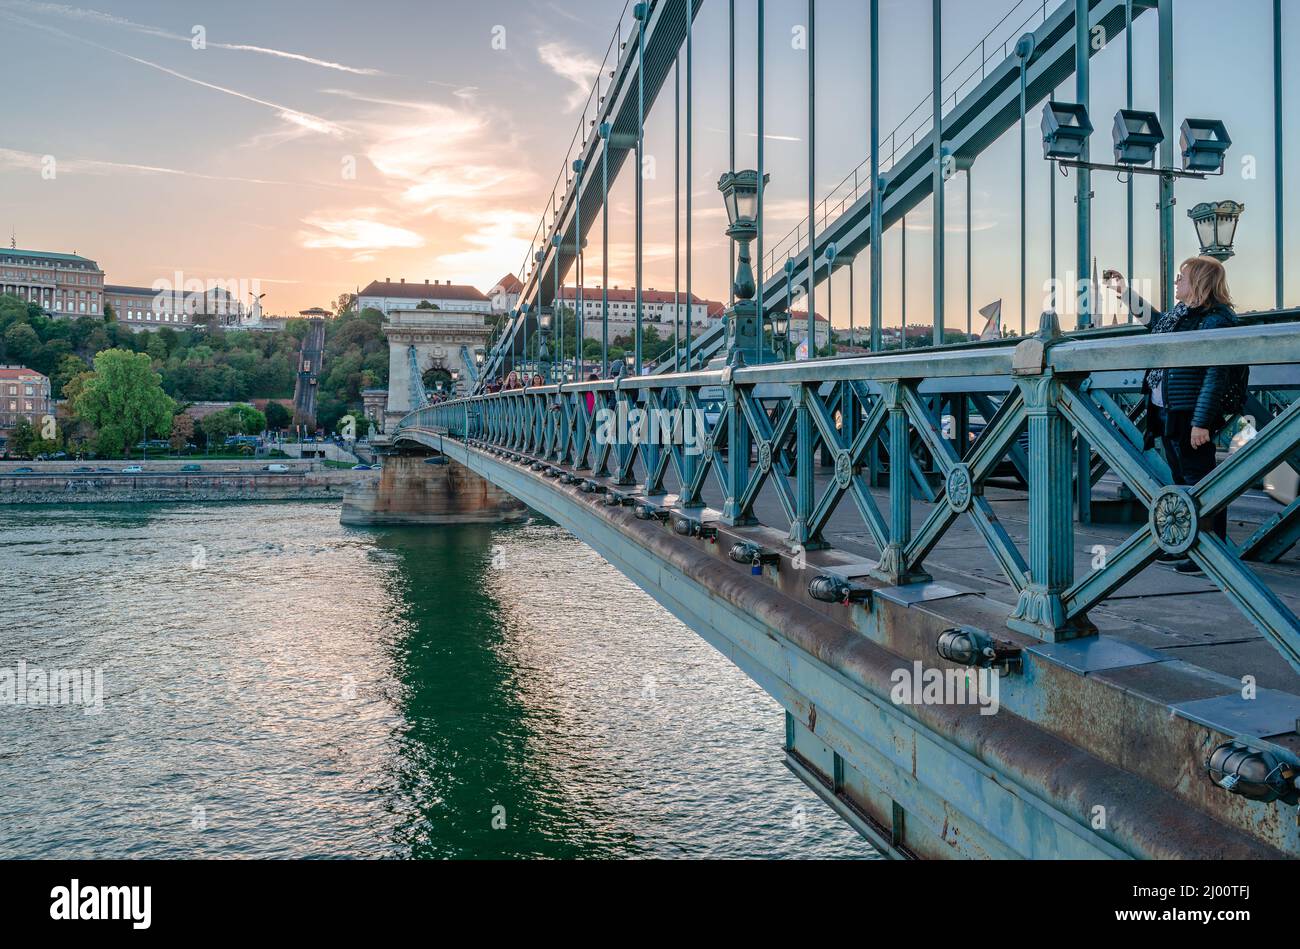 Budapest, Hungary - October 4 2018: Sunset with the Chain Bridge and with Buda, the western side of the city, in the background. Stock Photo